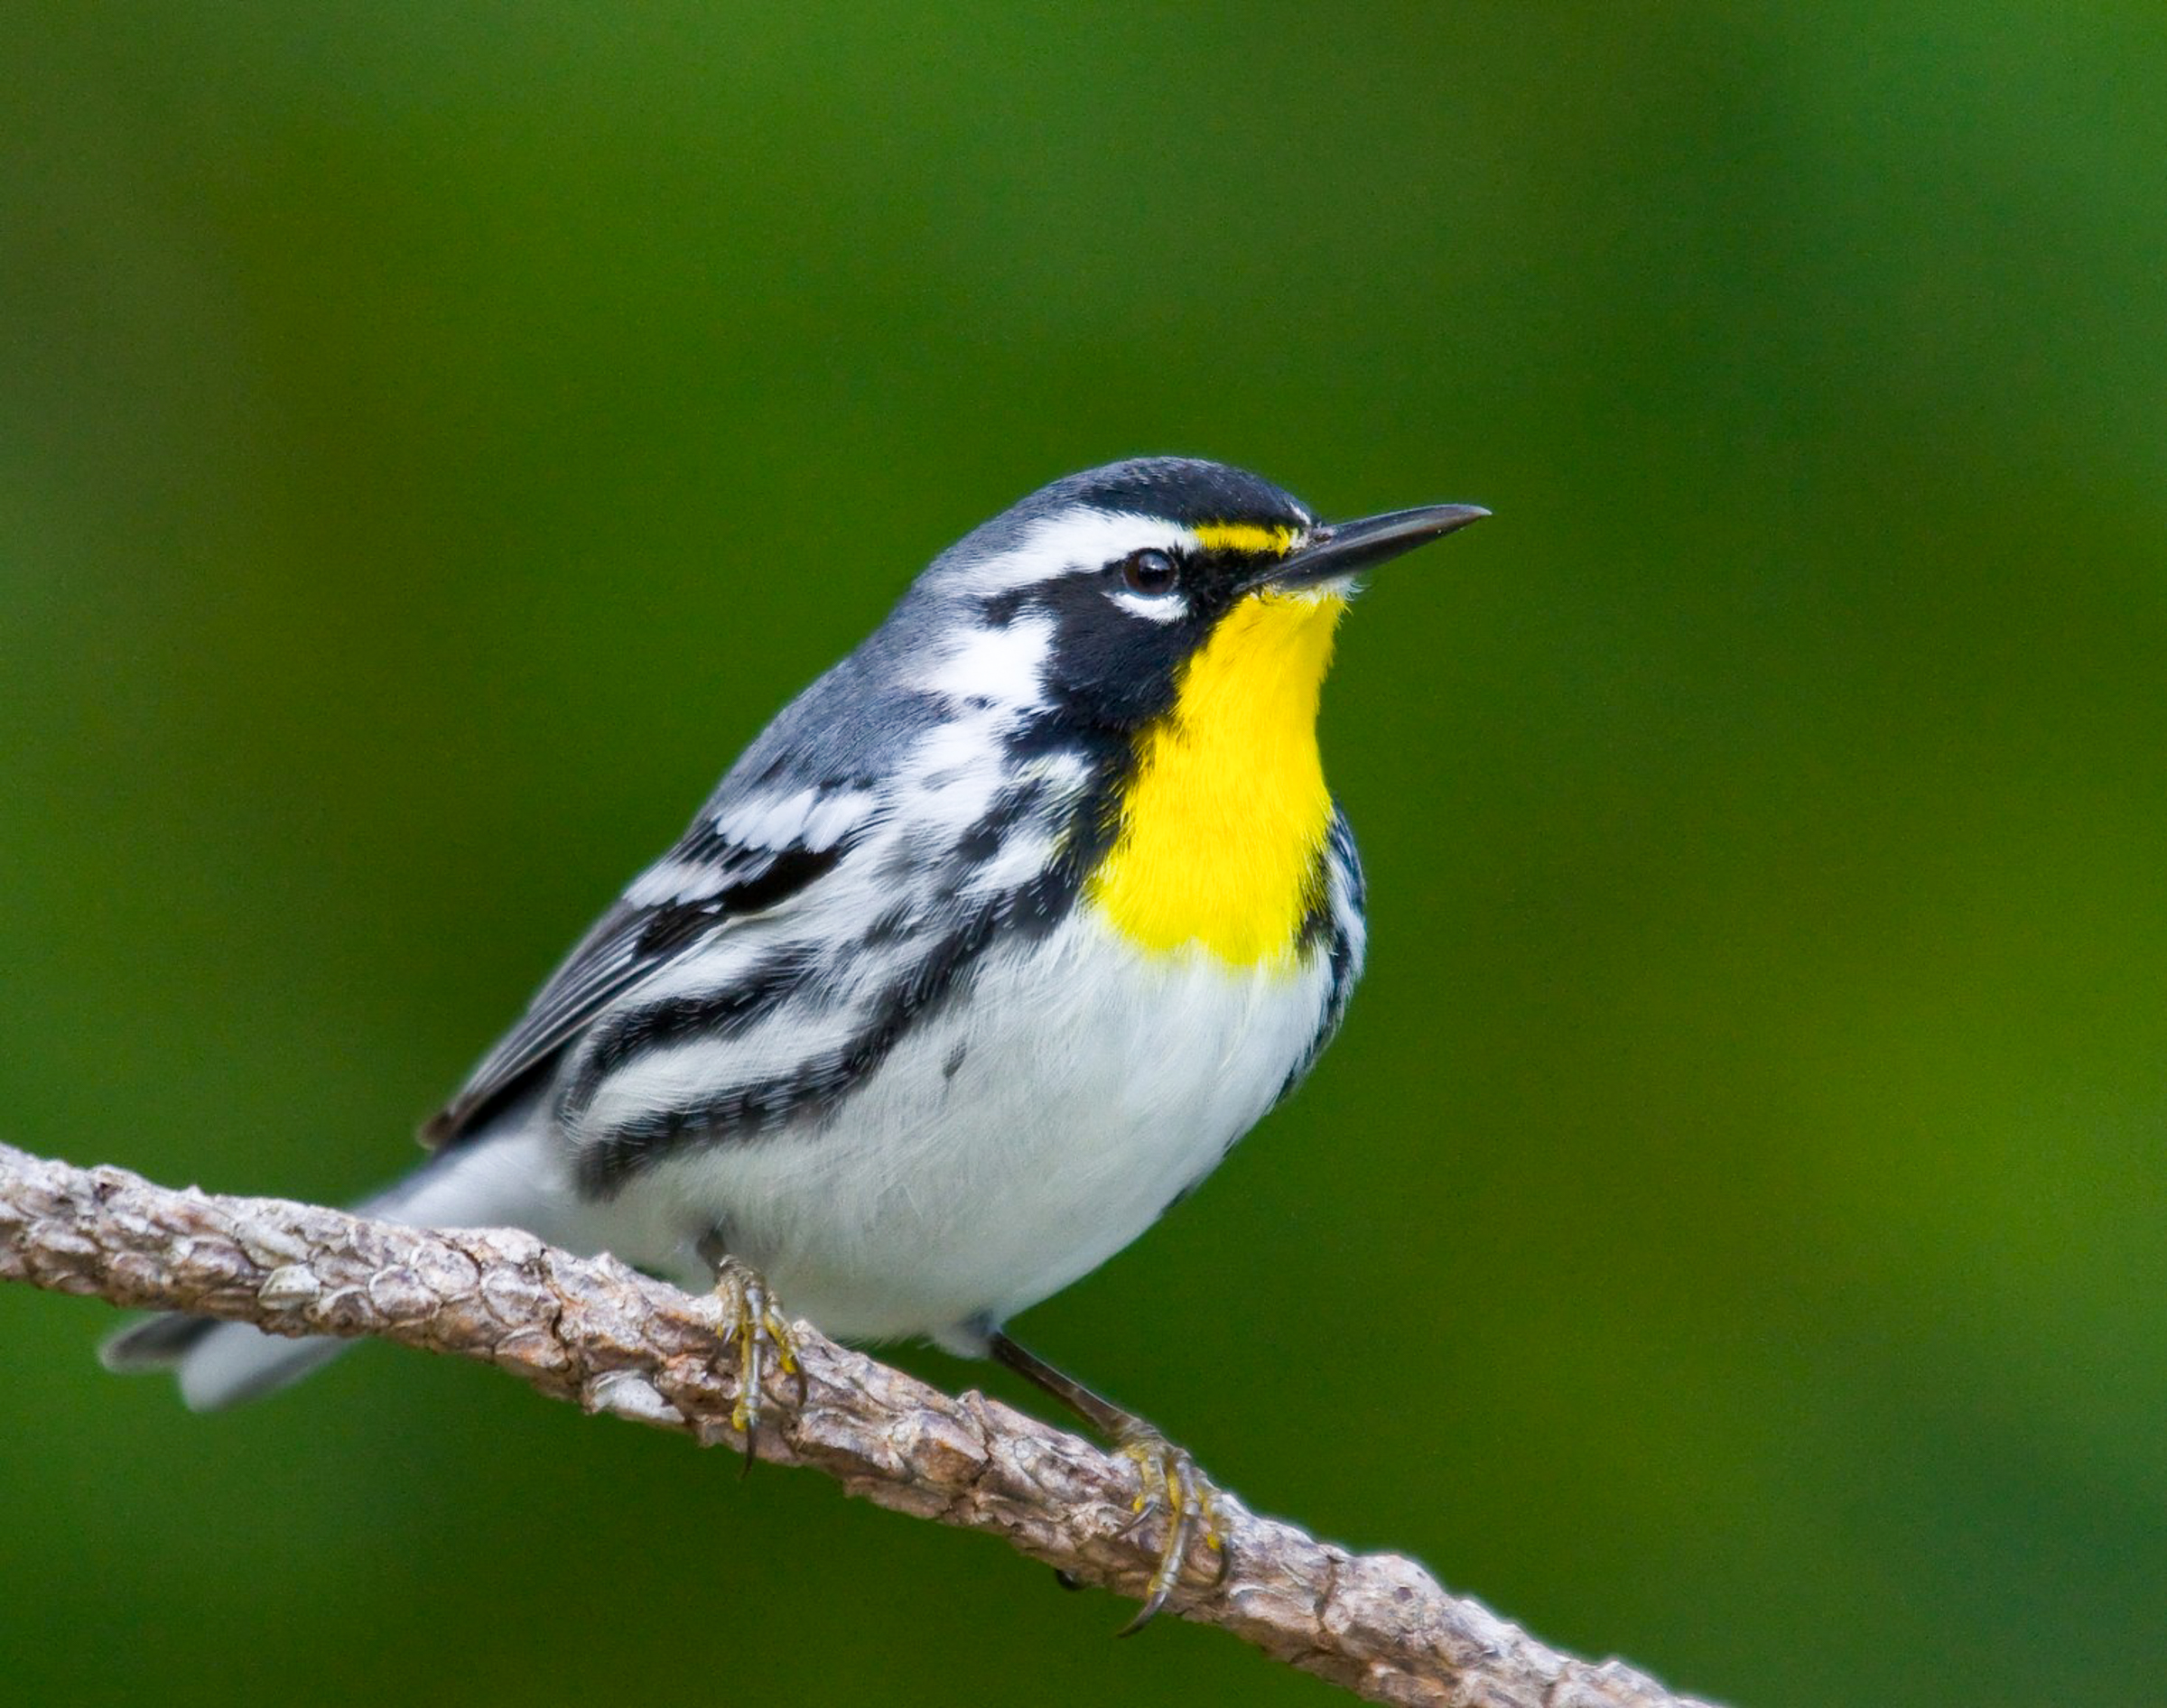 Yellow-throated Warbler sitting on a branch, with a green background.